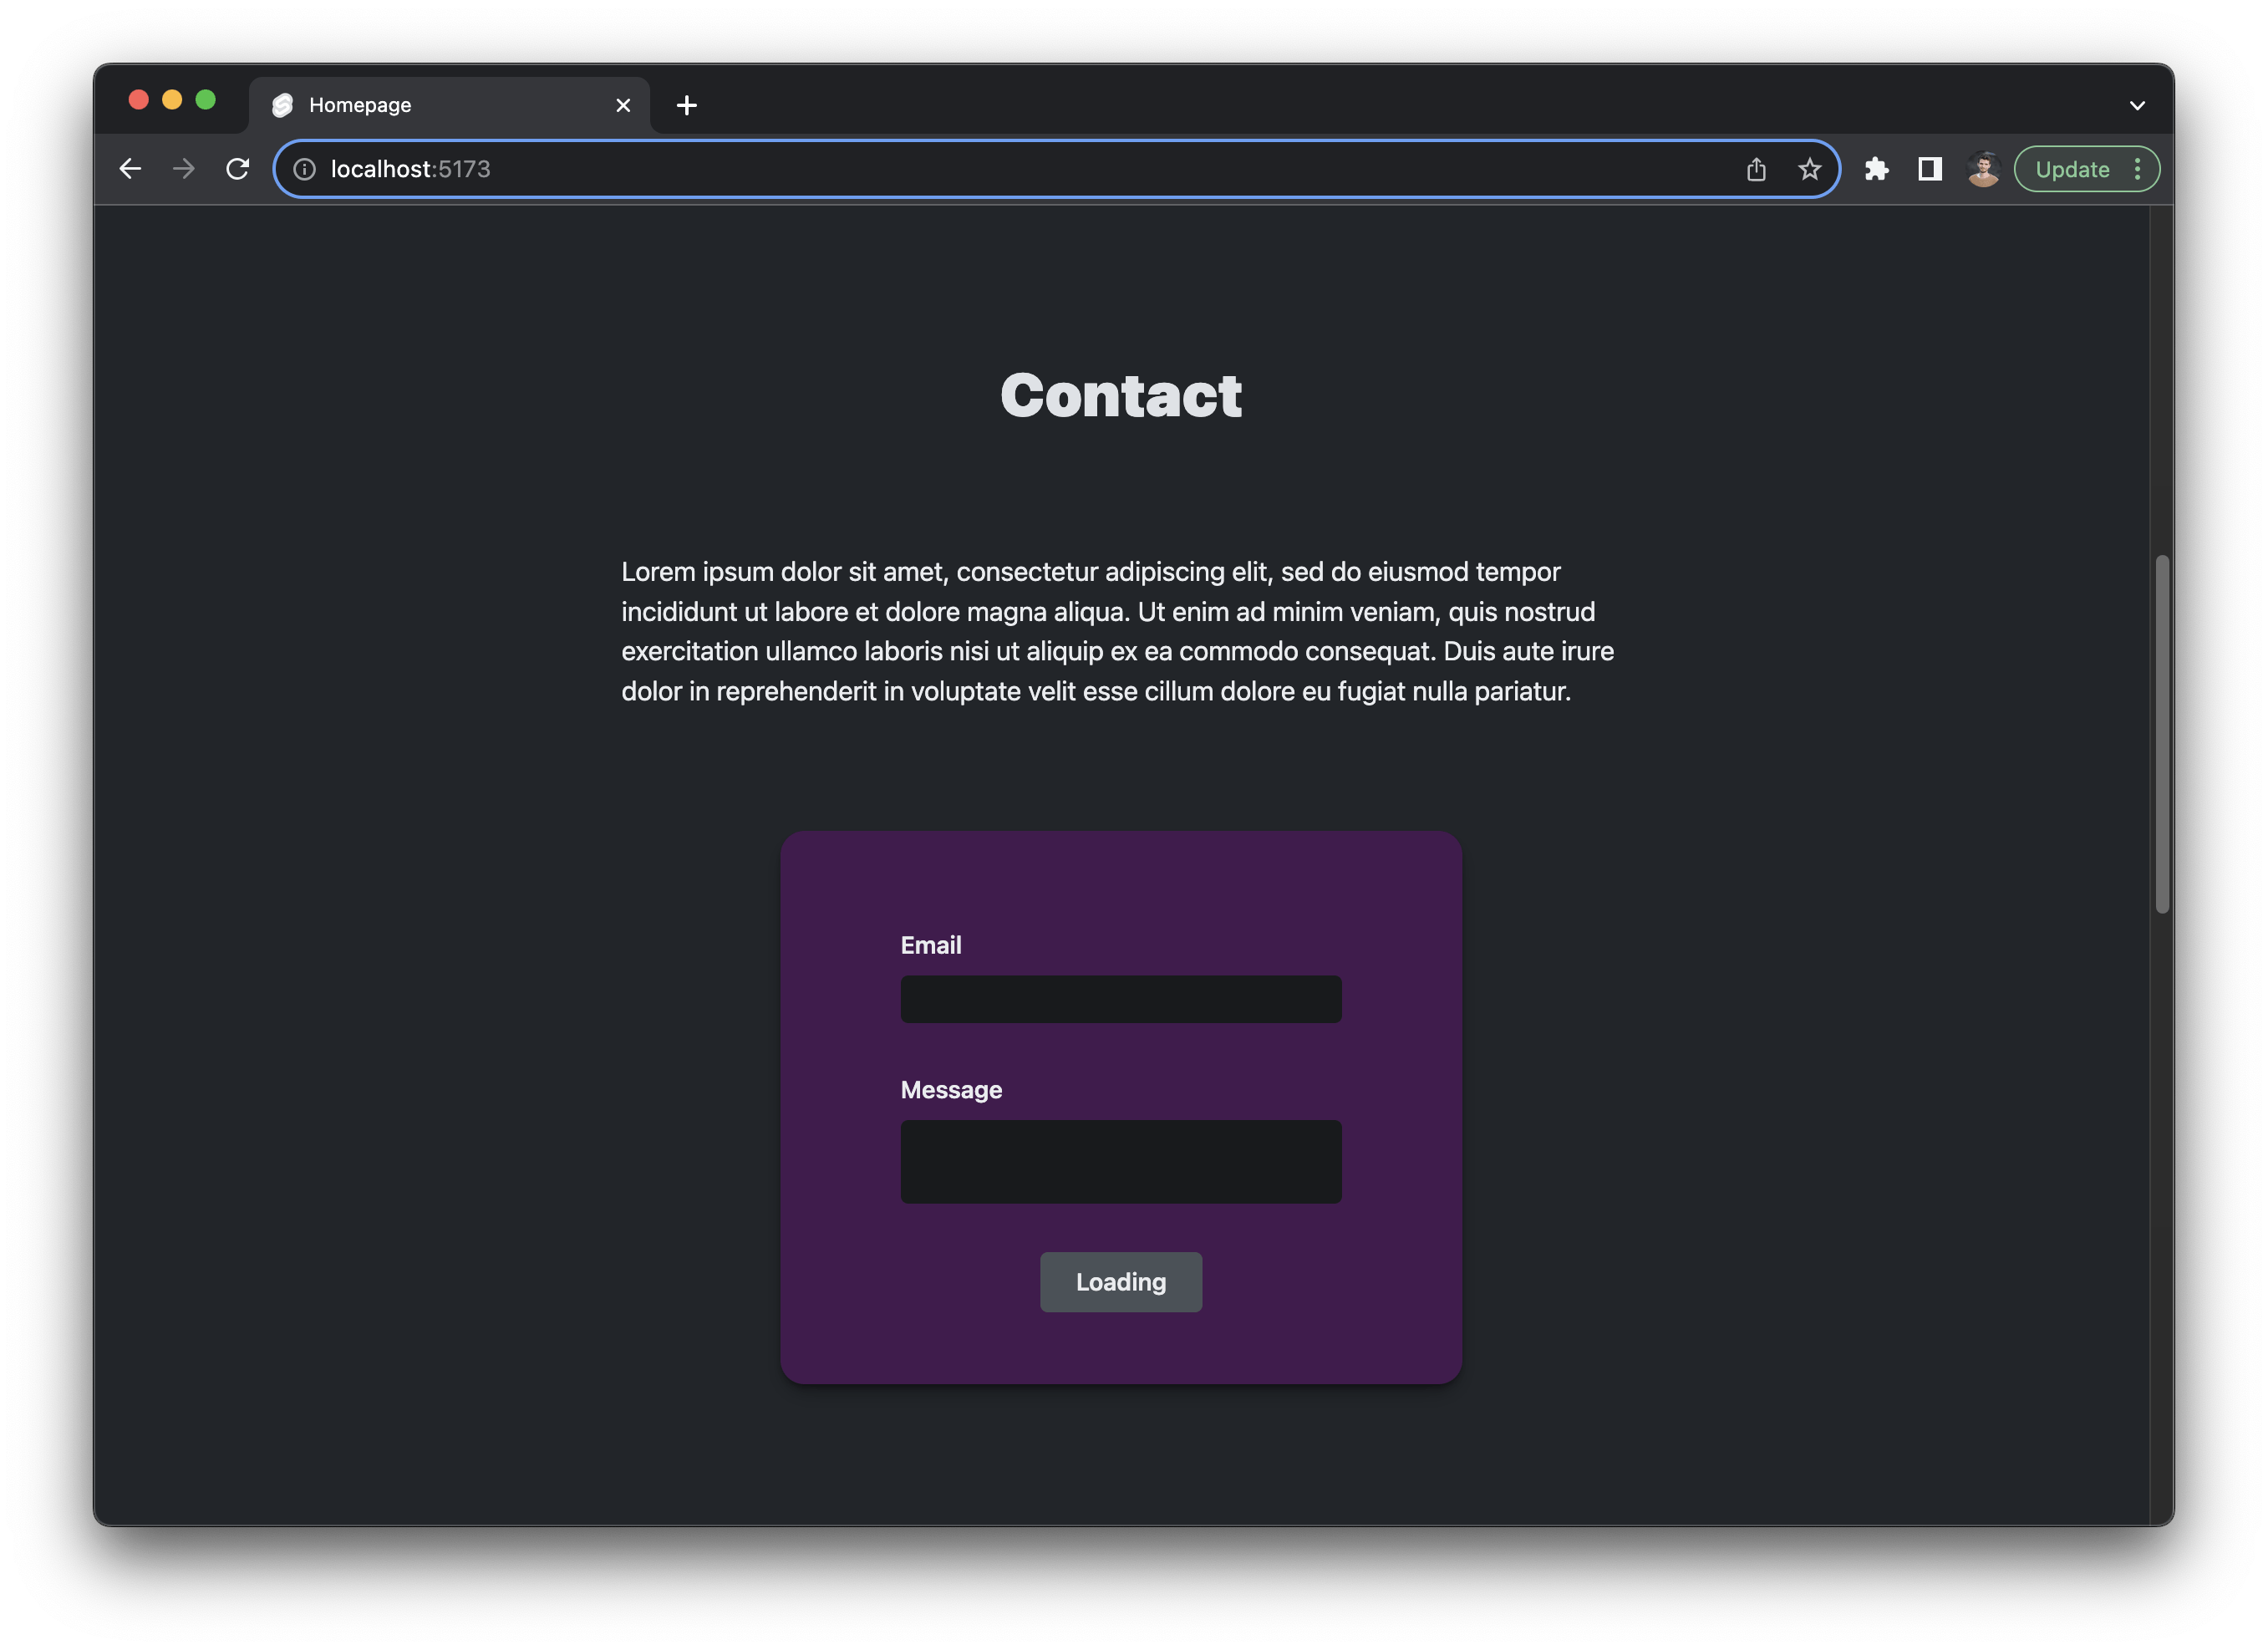 Image of contact form on the frontend of the site.